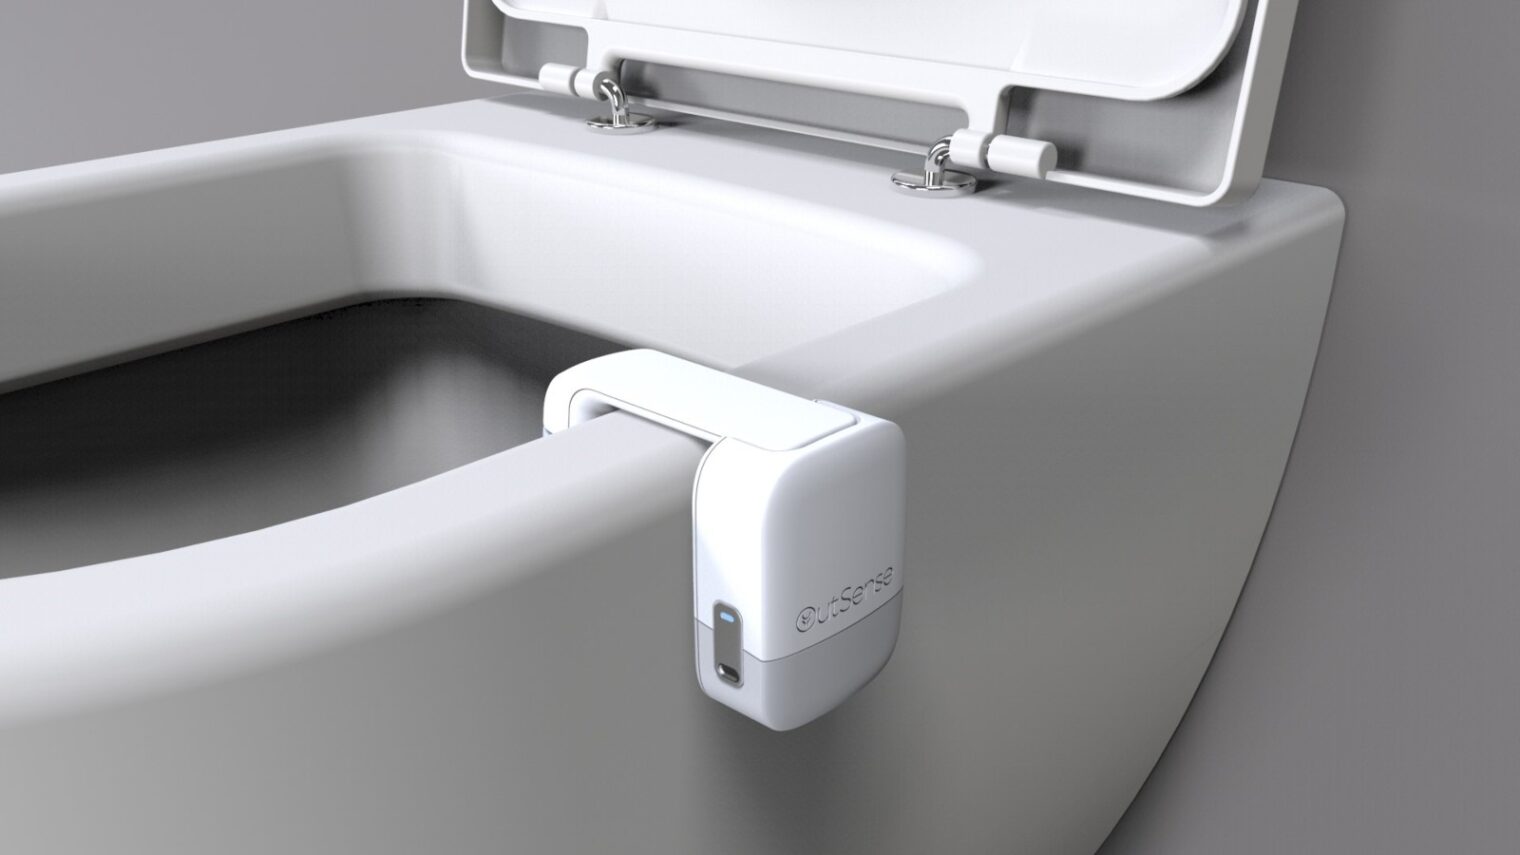 The OutSense system automatically checks excretions for traces of blood every time you use the toilet. Photo courtesy of OutSense